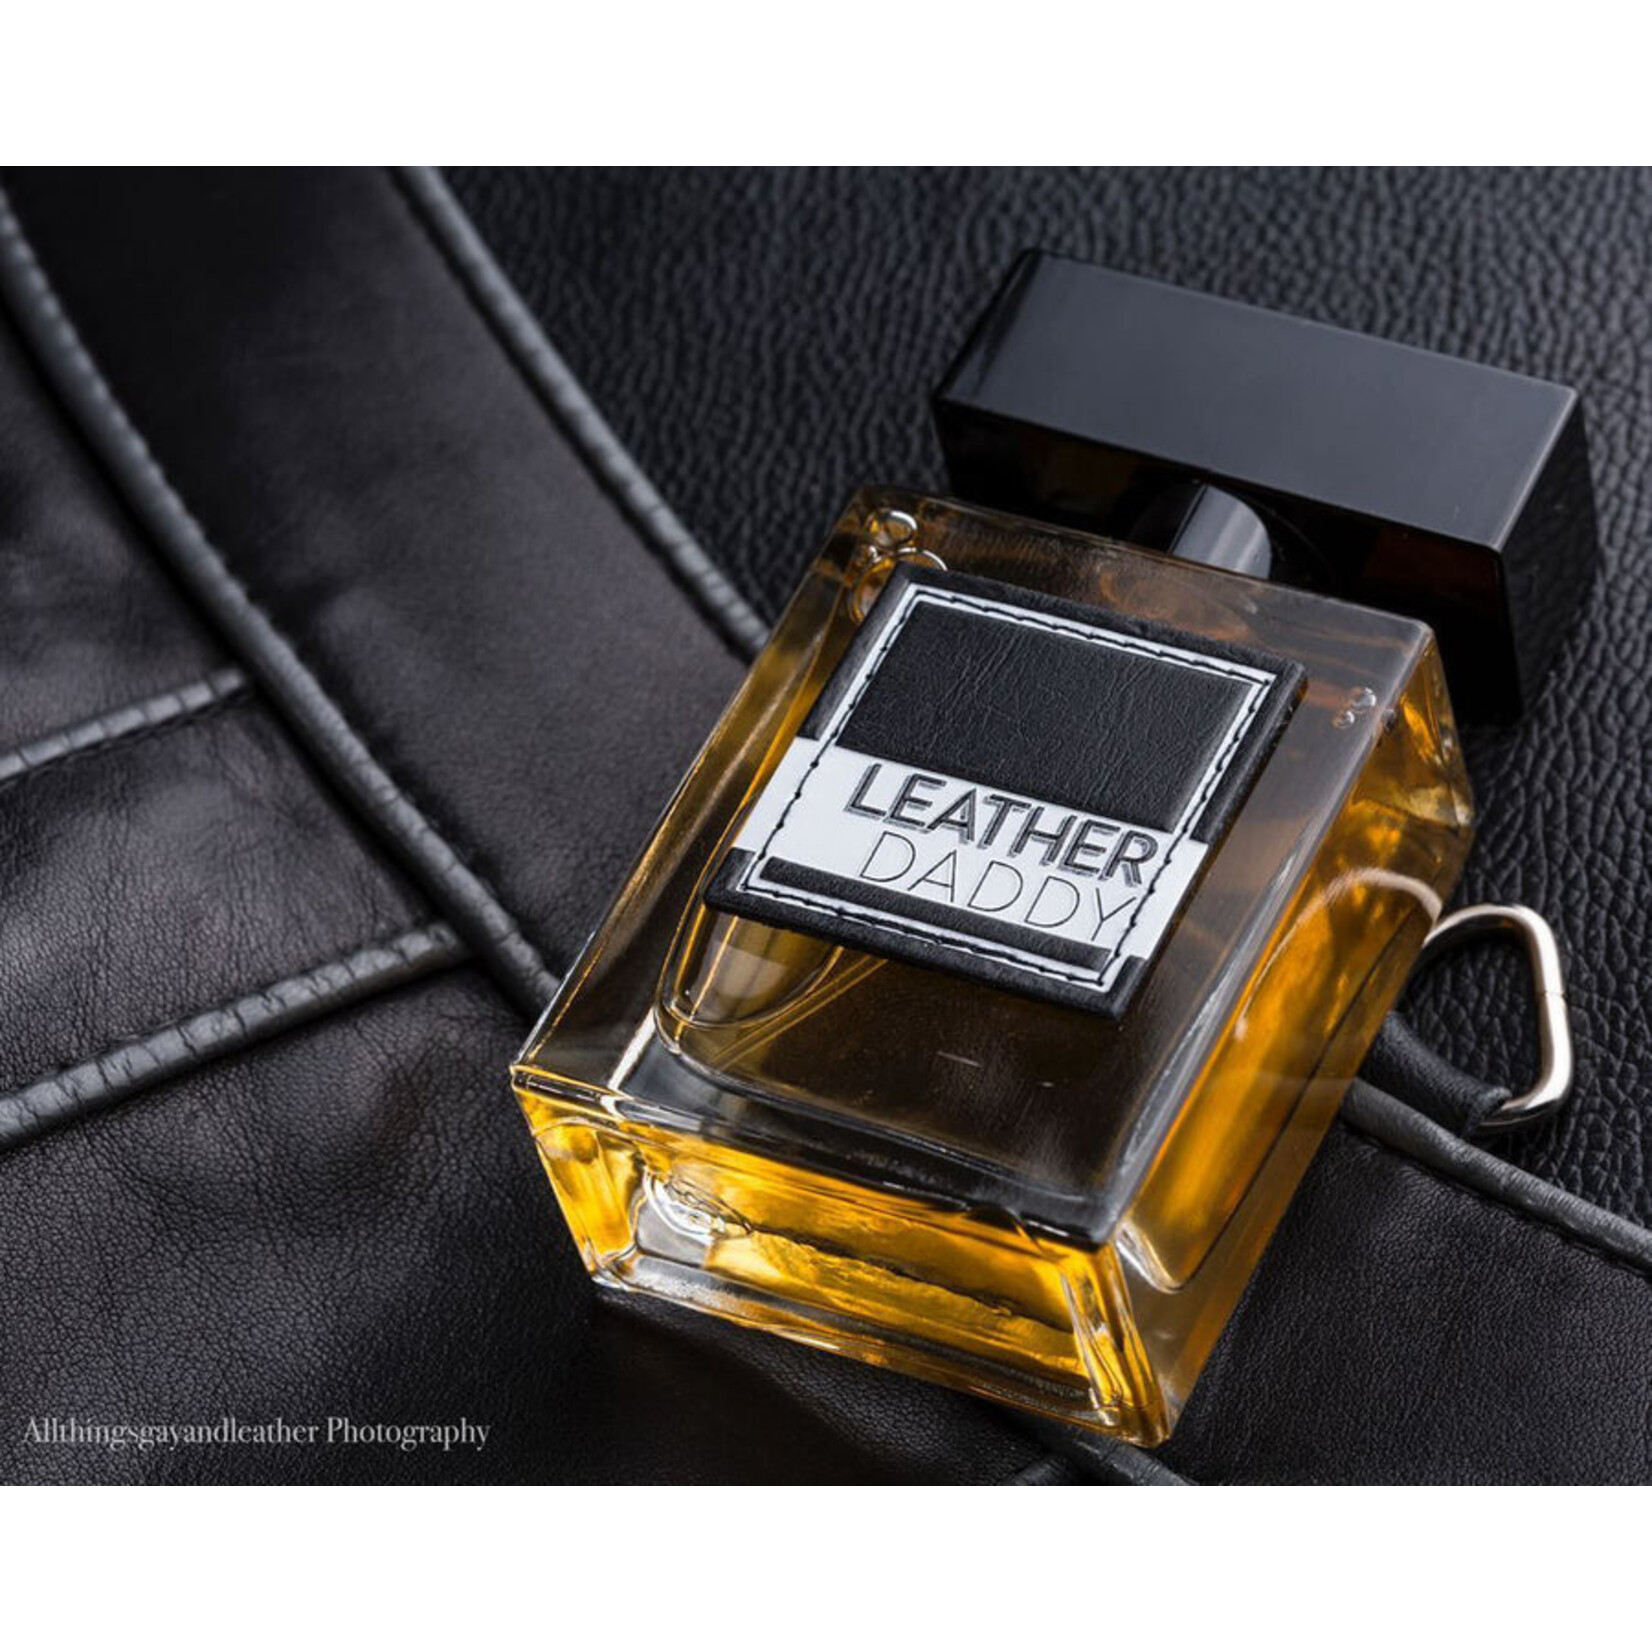 LeatherDaddy Skin Co Leather Daddy - Signature Cologne